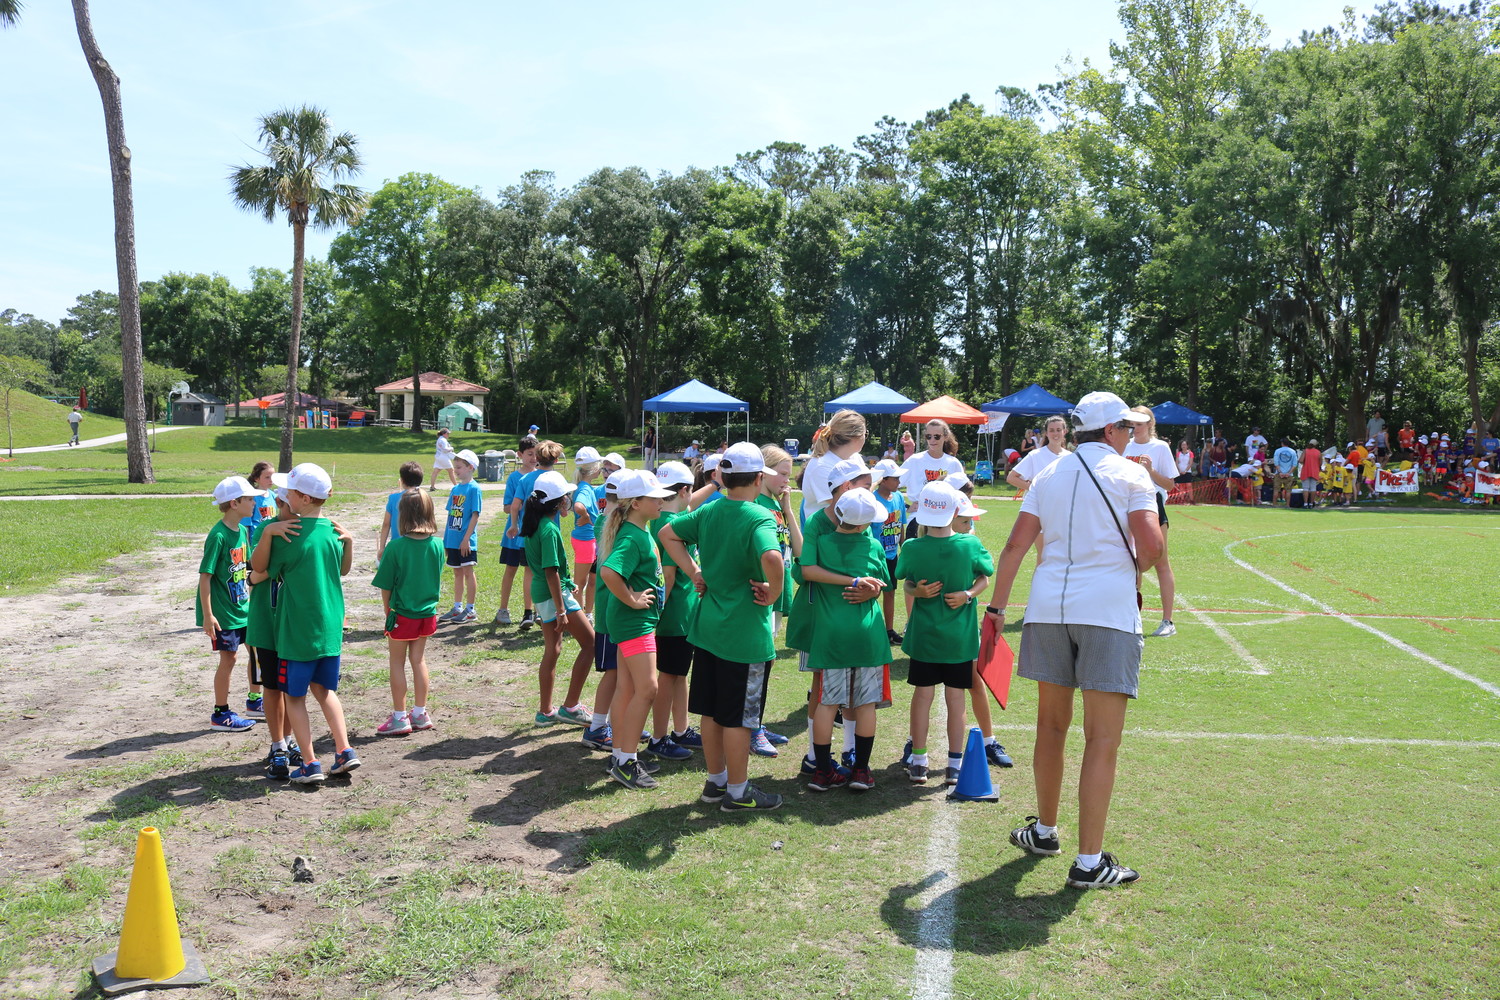 Bolles PVB students play a game at last week’s Field Day event in which they had to hug each other to hold a ball and carry it around a cone.